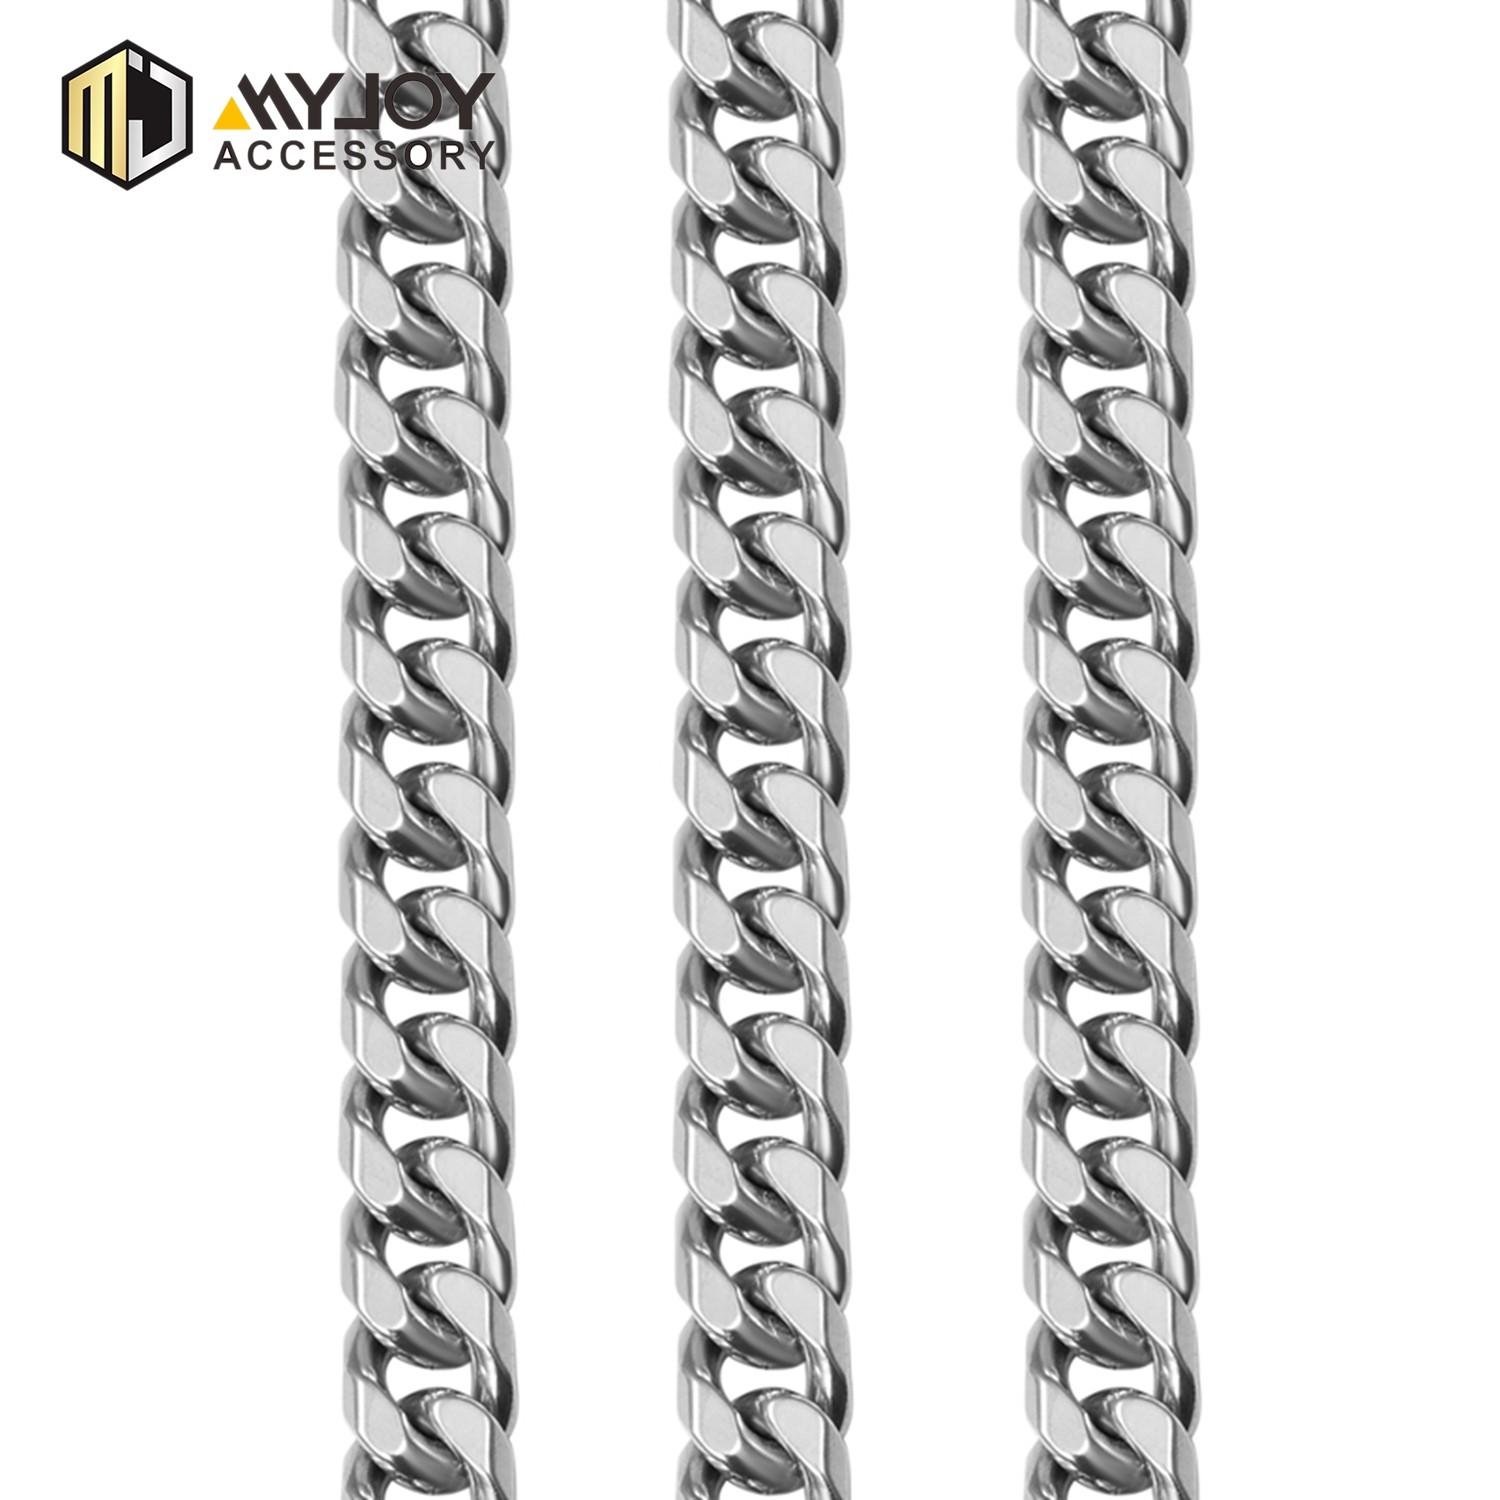 MYJOY zinc chain strap Suppliers for purses